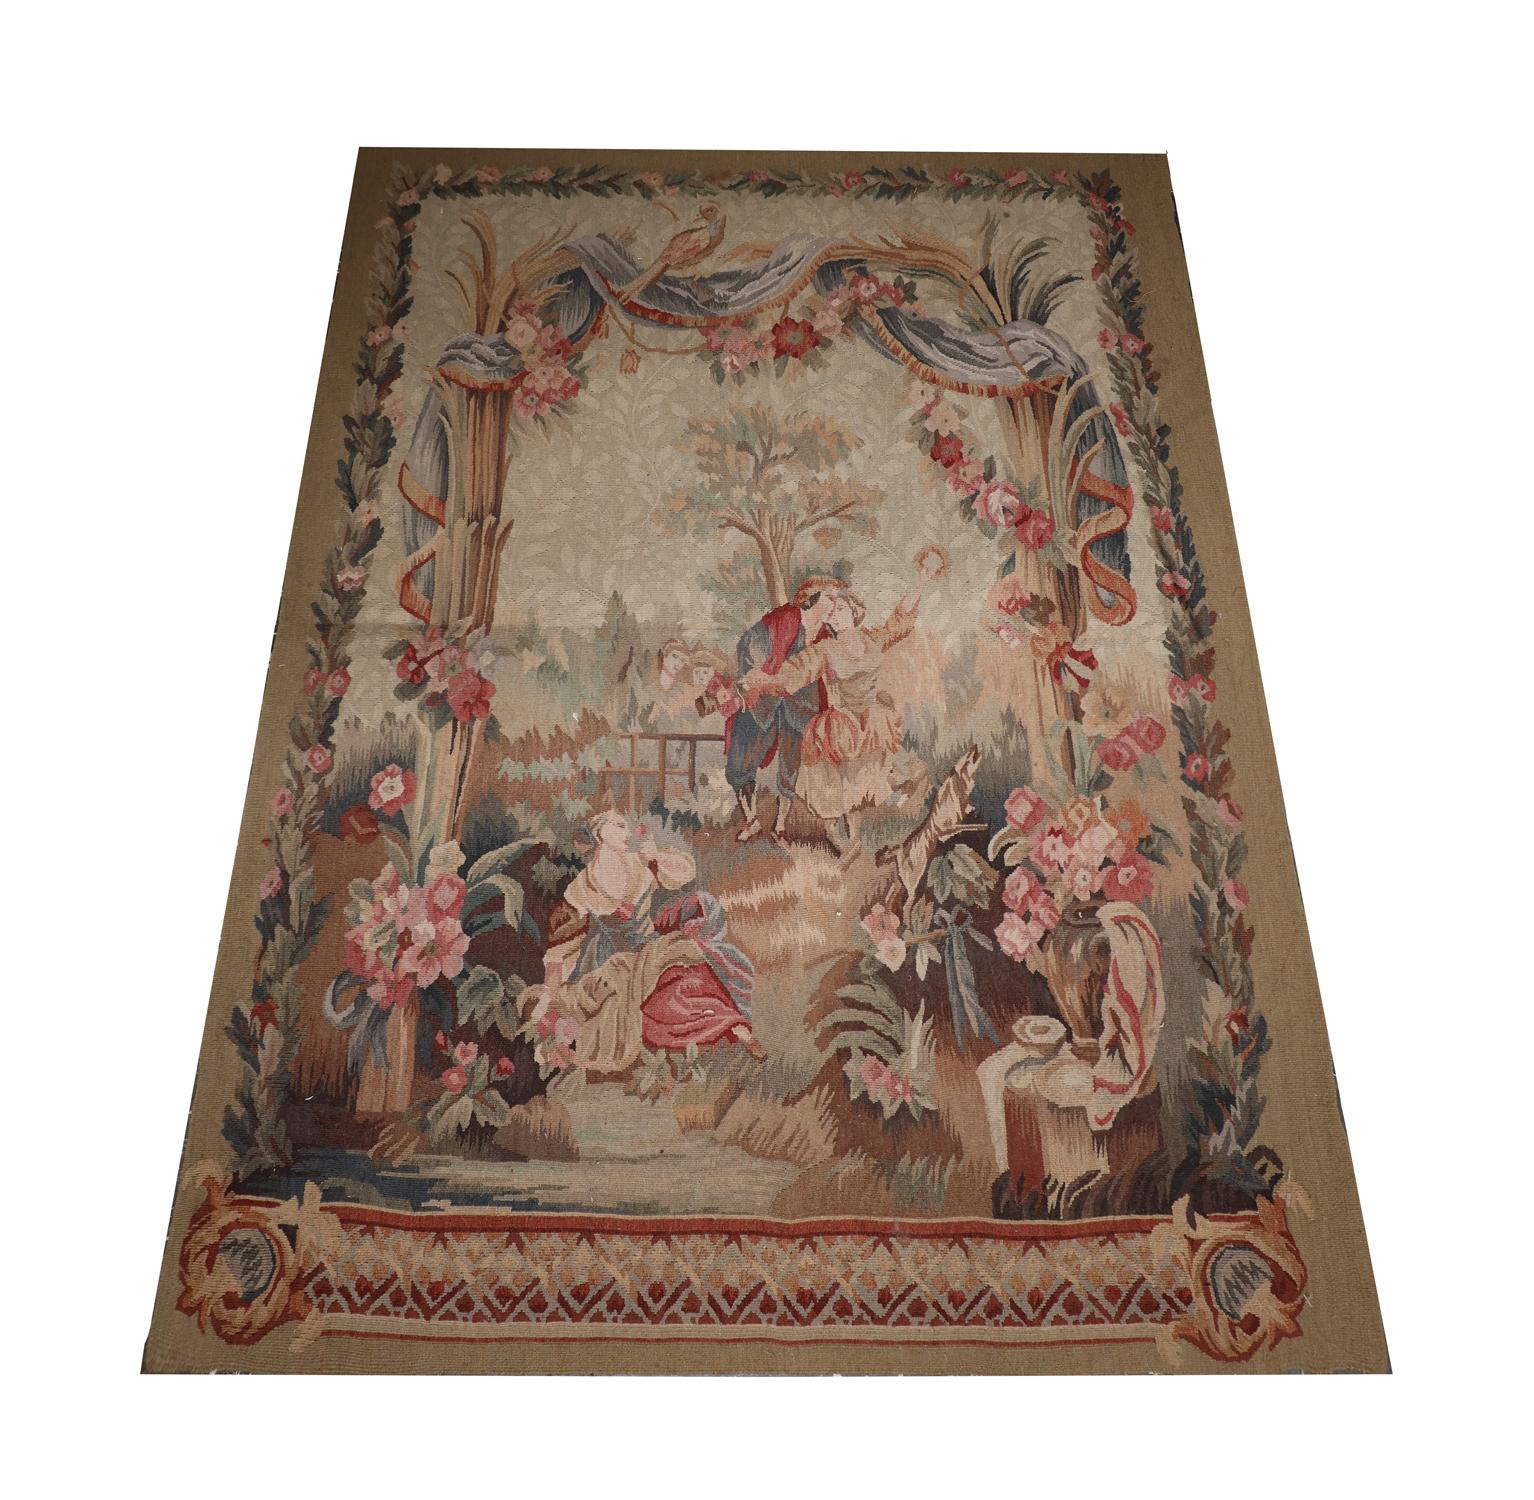 This tapestry is a French-style textile woven intricately to create a realistic forest scene featuring a trio of people, flowers, drapes and a dog. The colours and design work in harmony, creating an eyecatching piece that is sure to uplift any